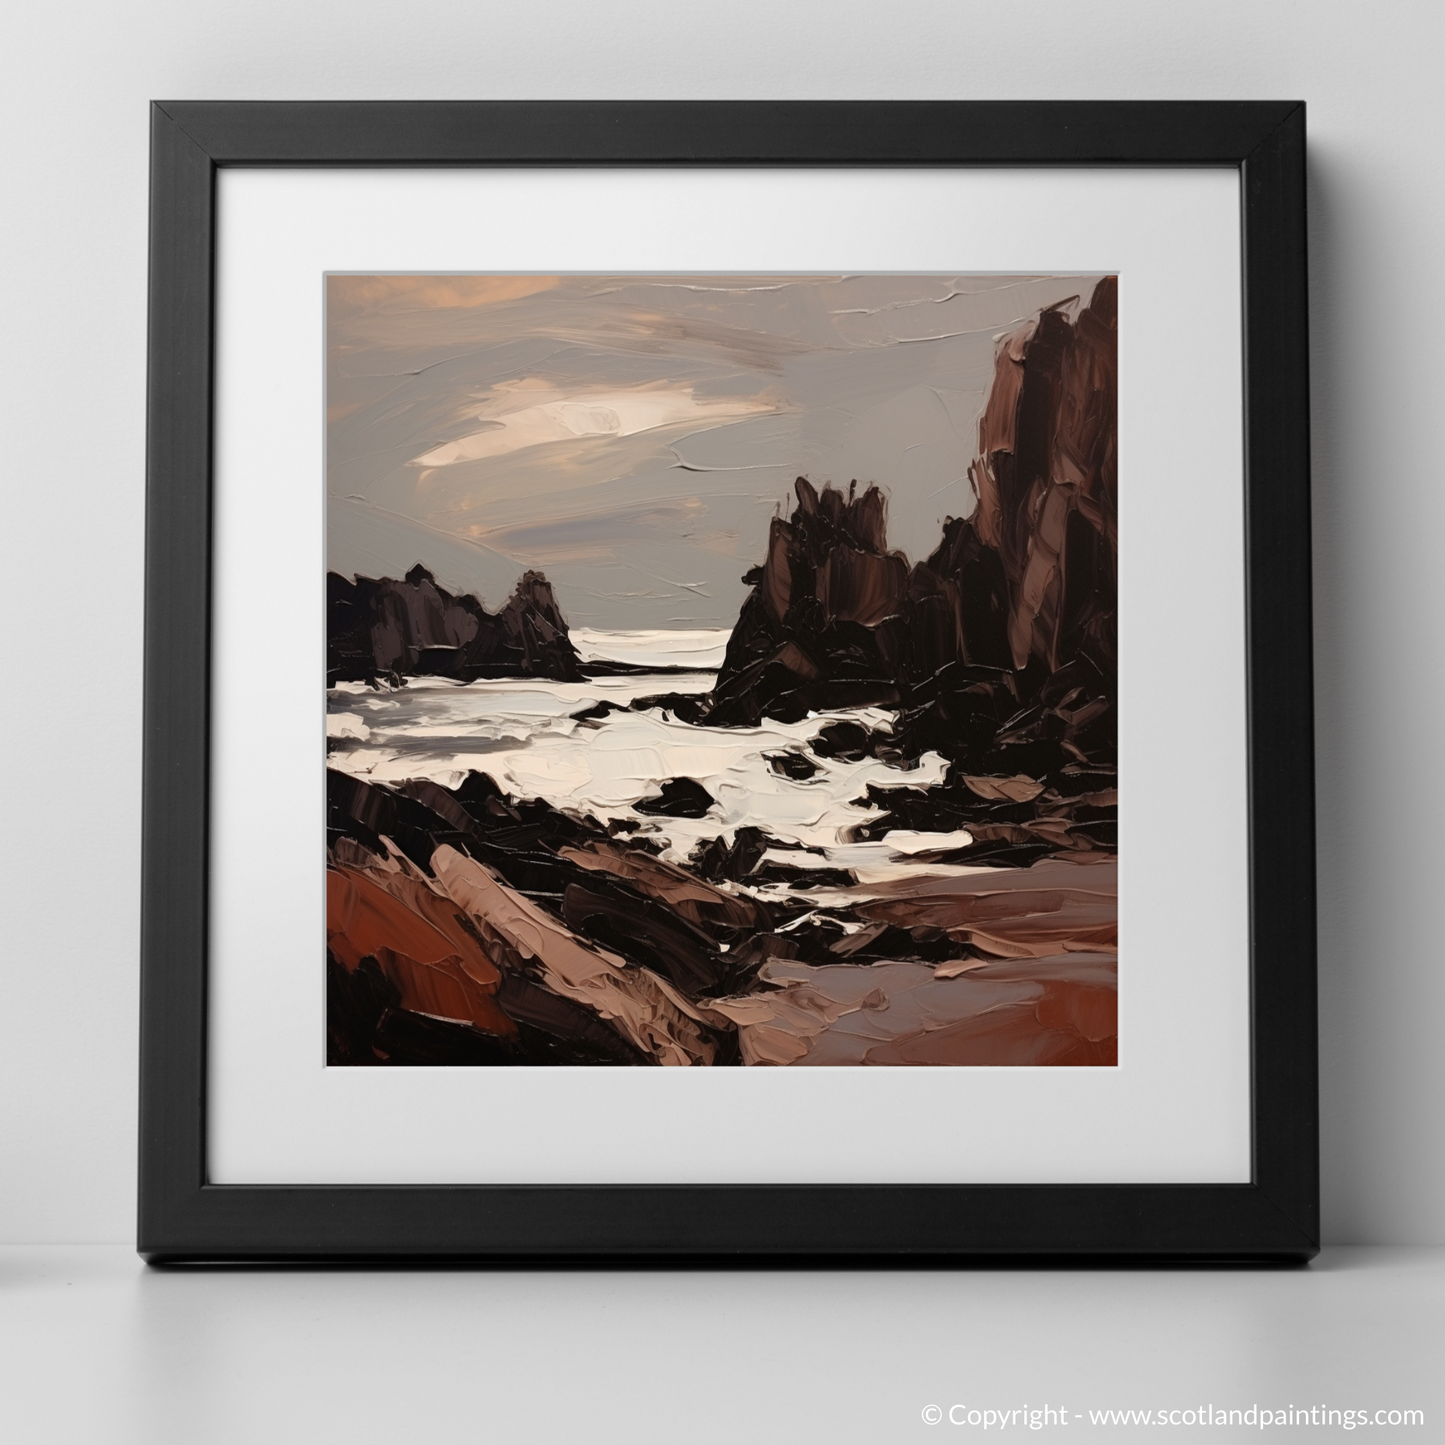 Art Print of Catterline Bay, Aberdeenshire with a black frame